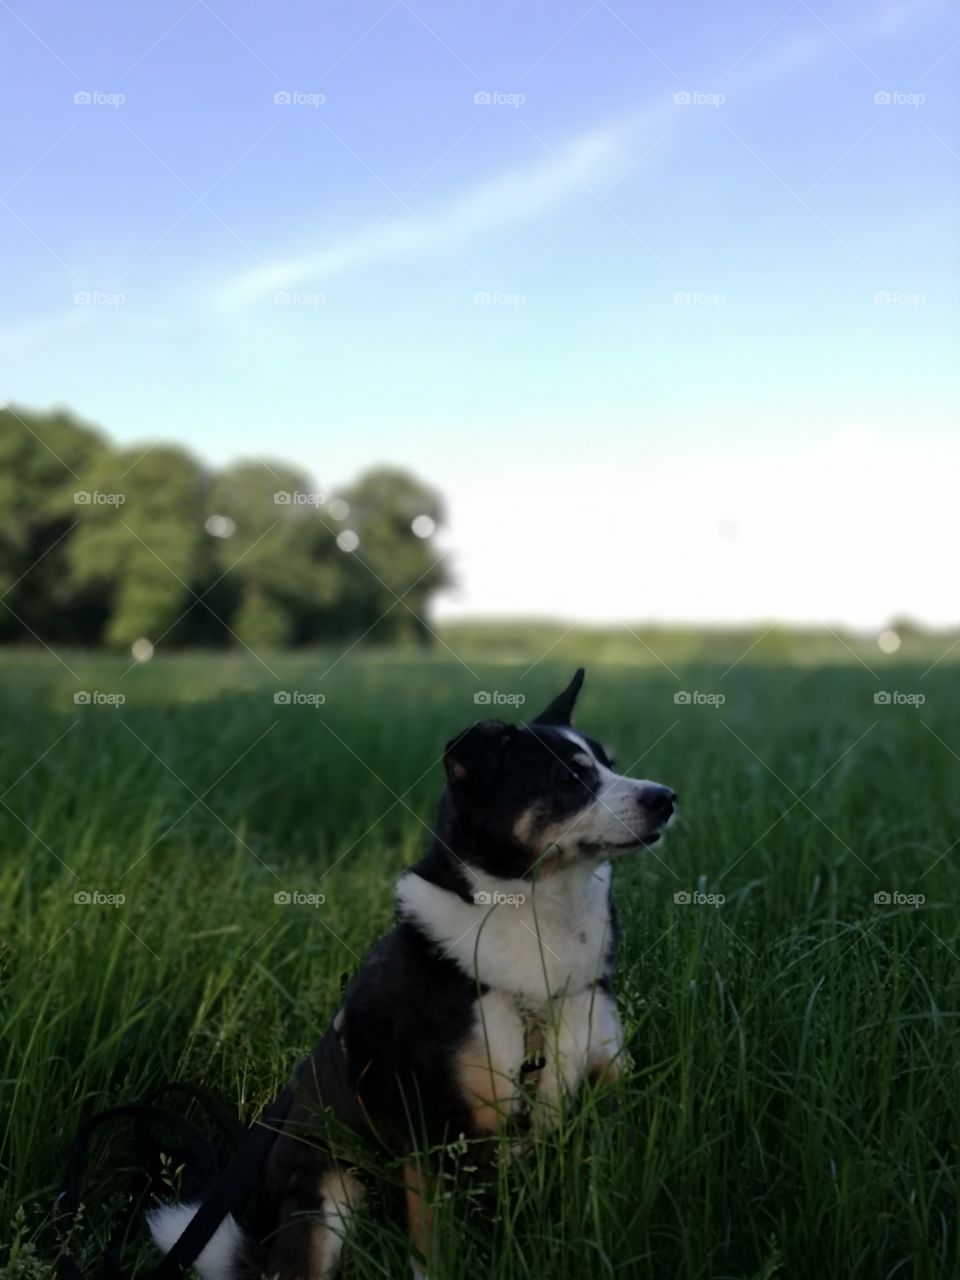 Small dog sitting in a field at dawn